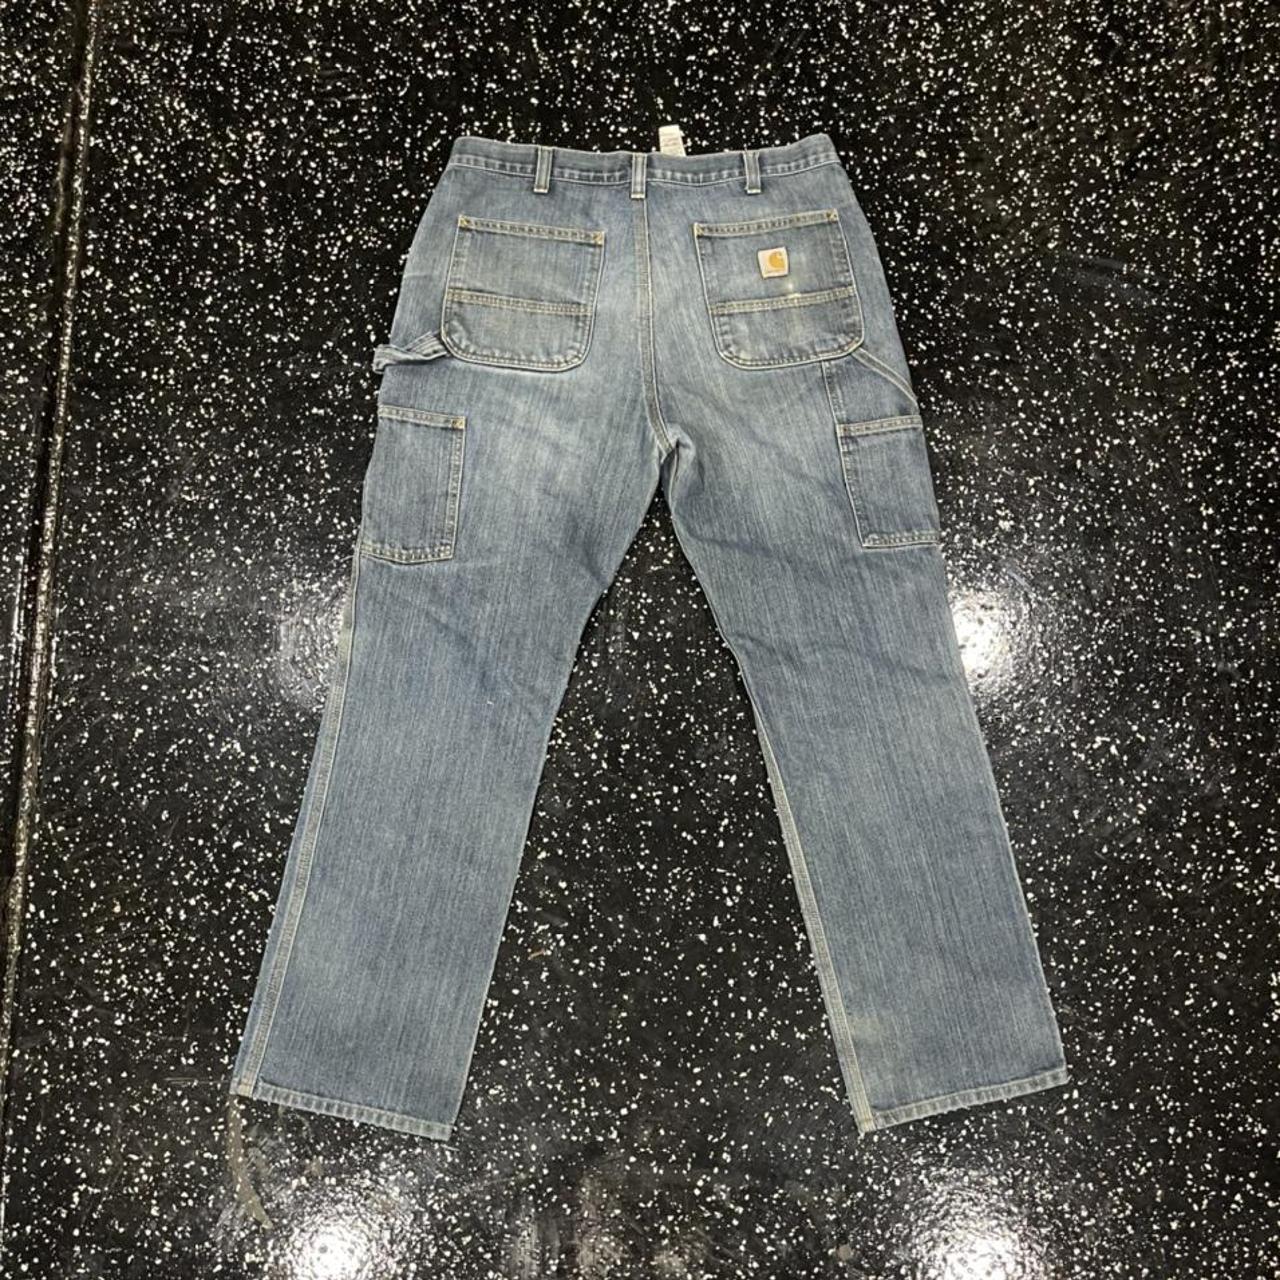 Product Image 2 - Carhartt carpenters jeans
Nice fade and